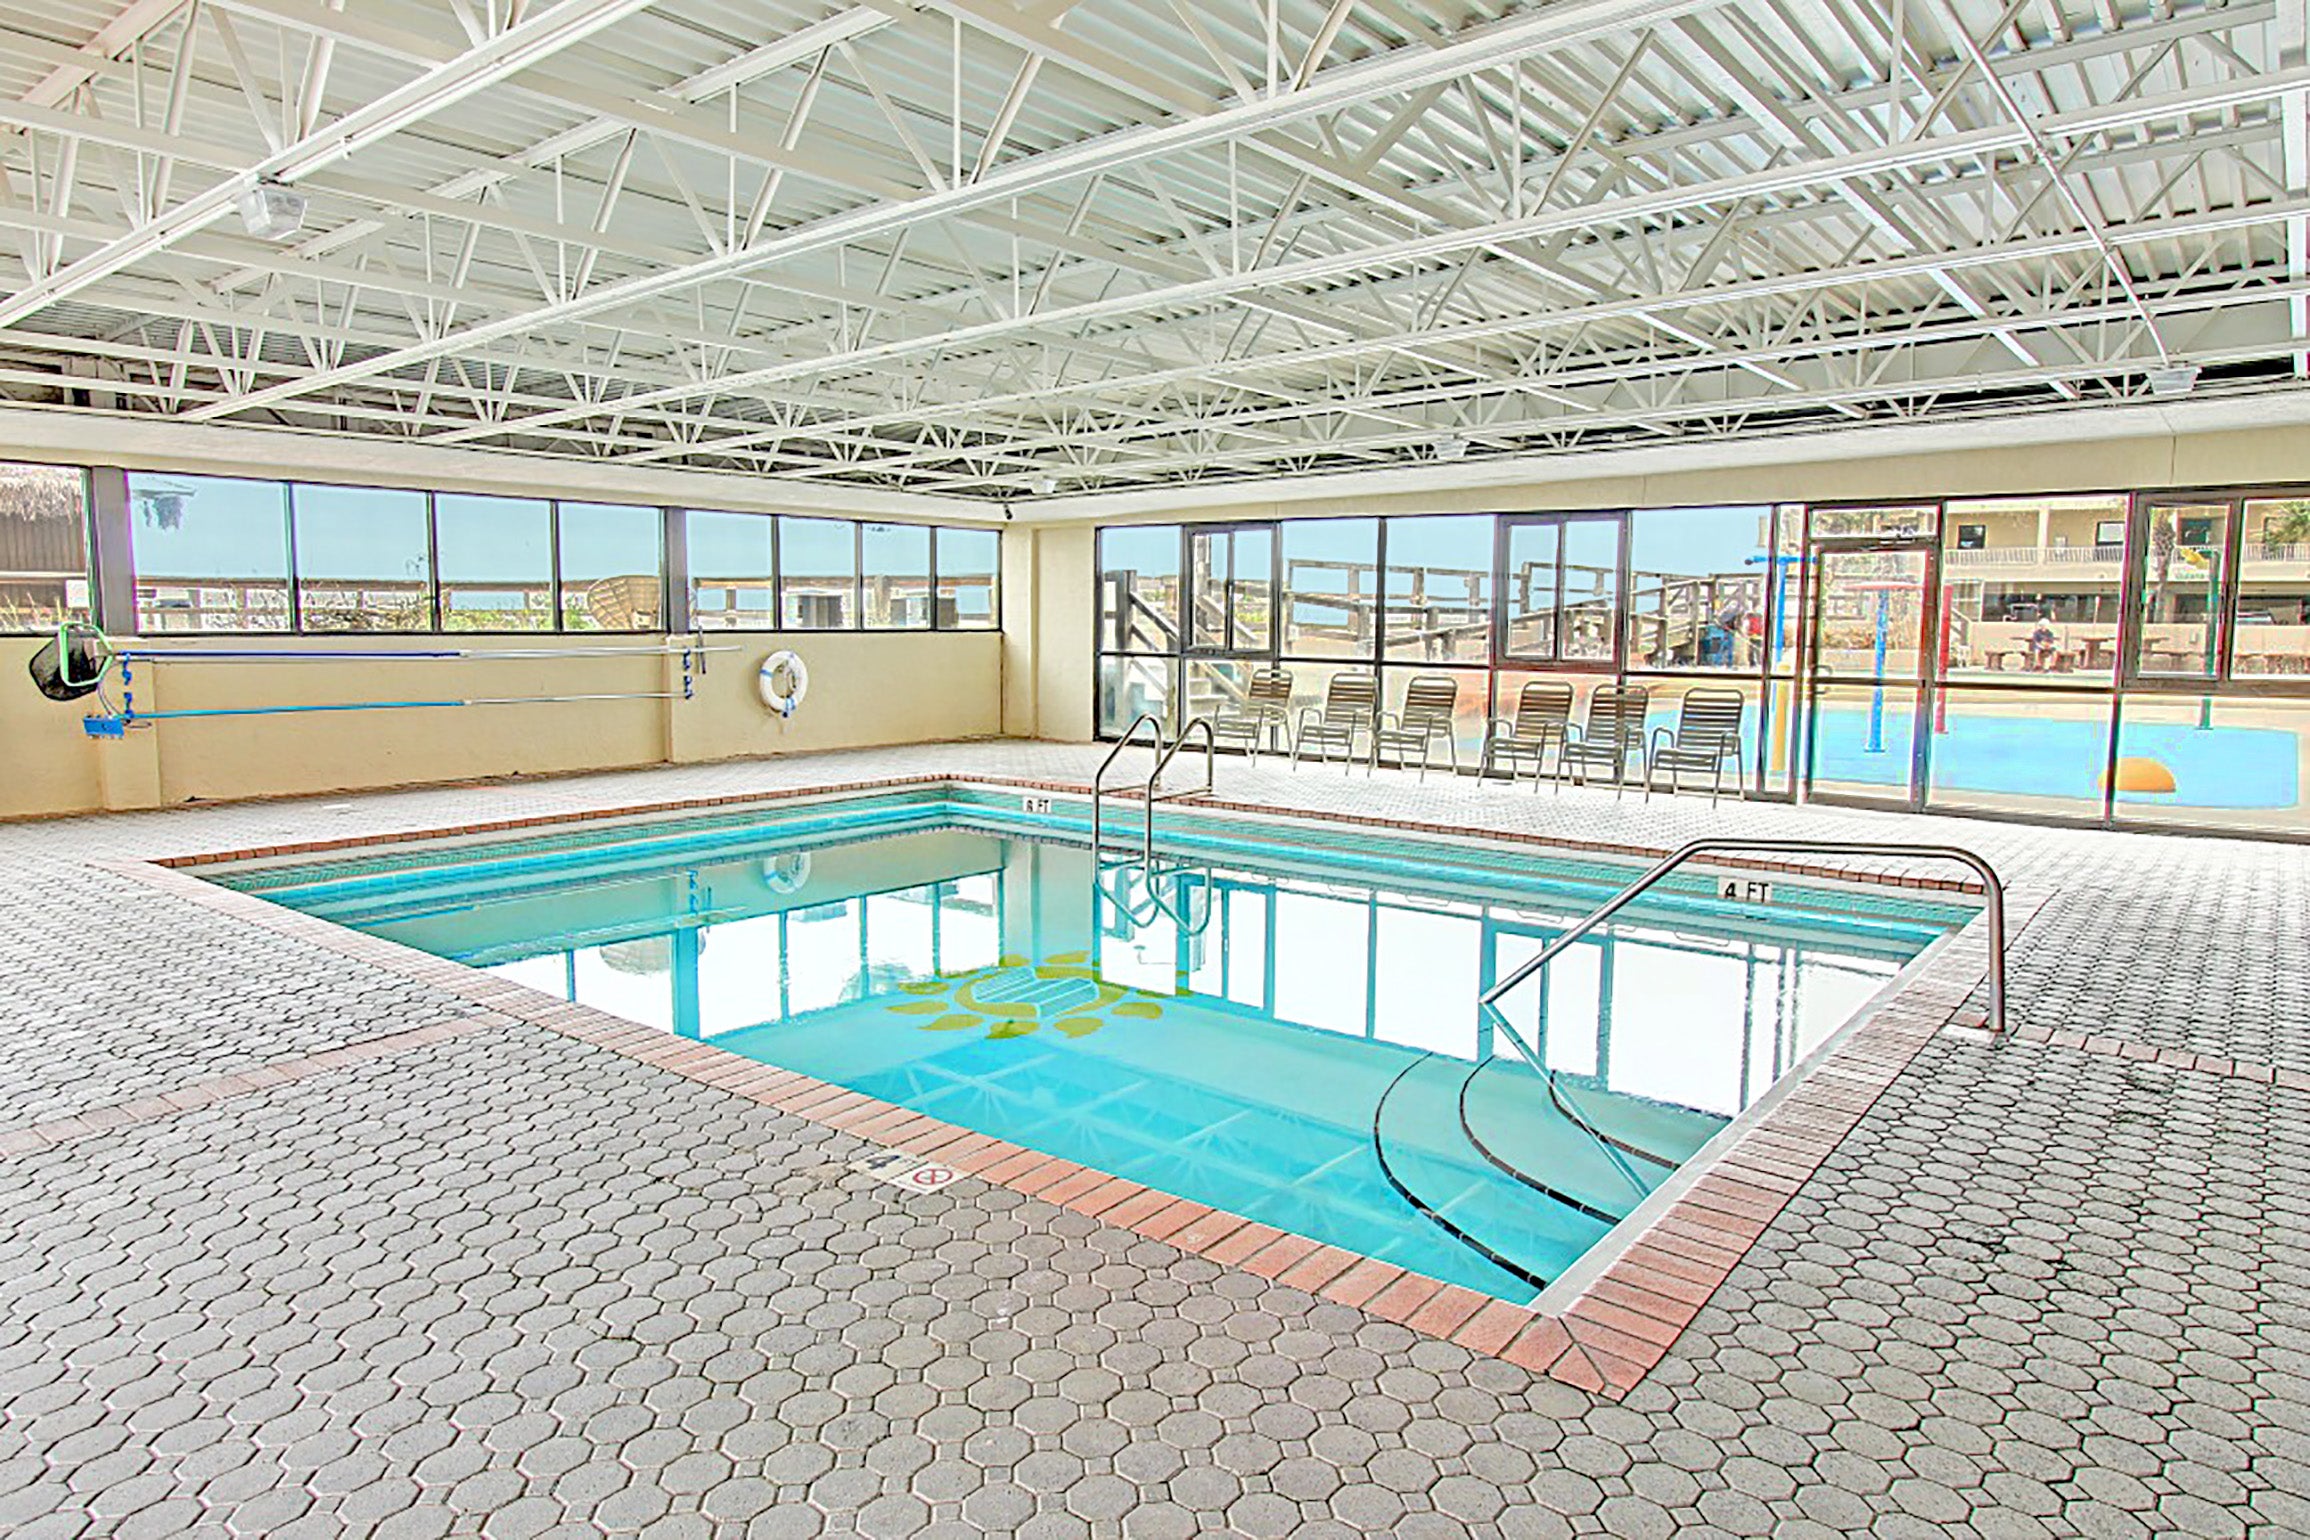 Awesome indoor Pool with Playground outside!